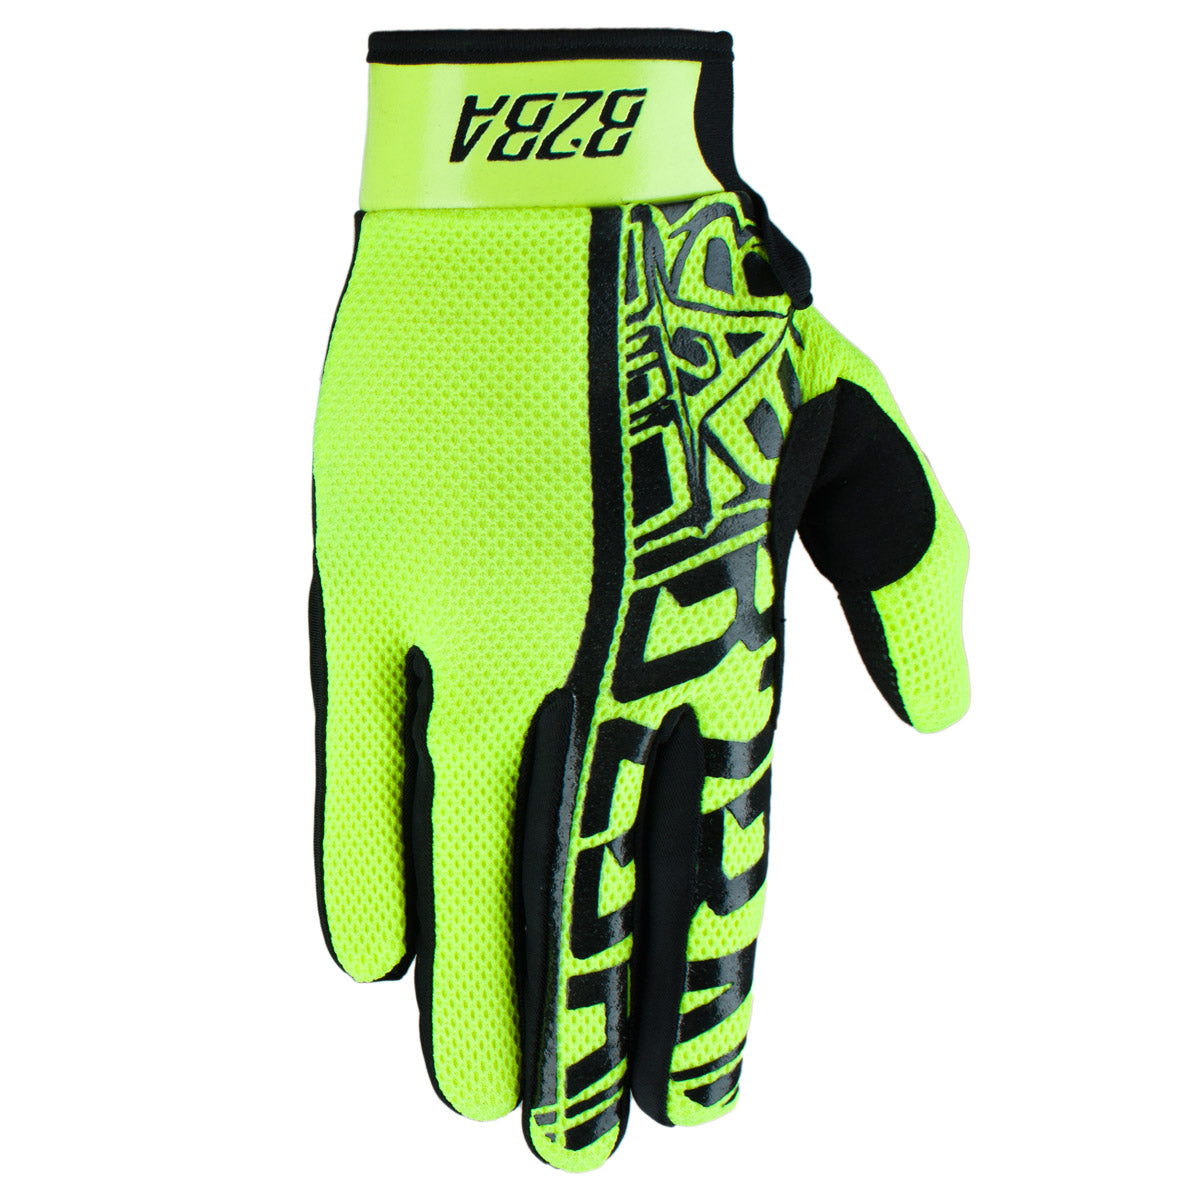 US Awesome Race Glove - B2BA Clothing S / yellow